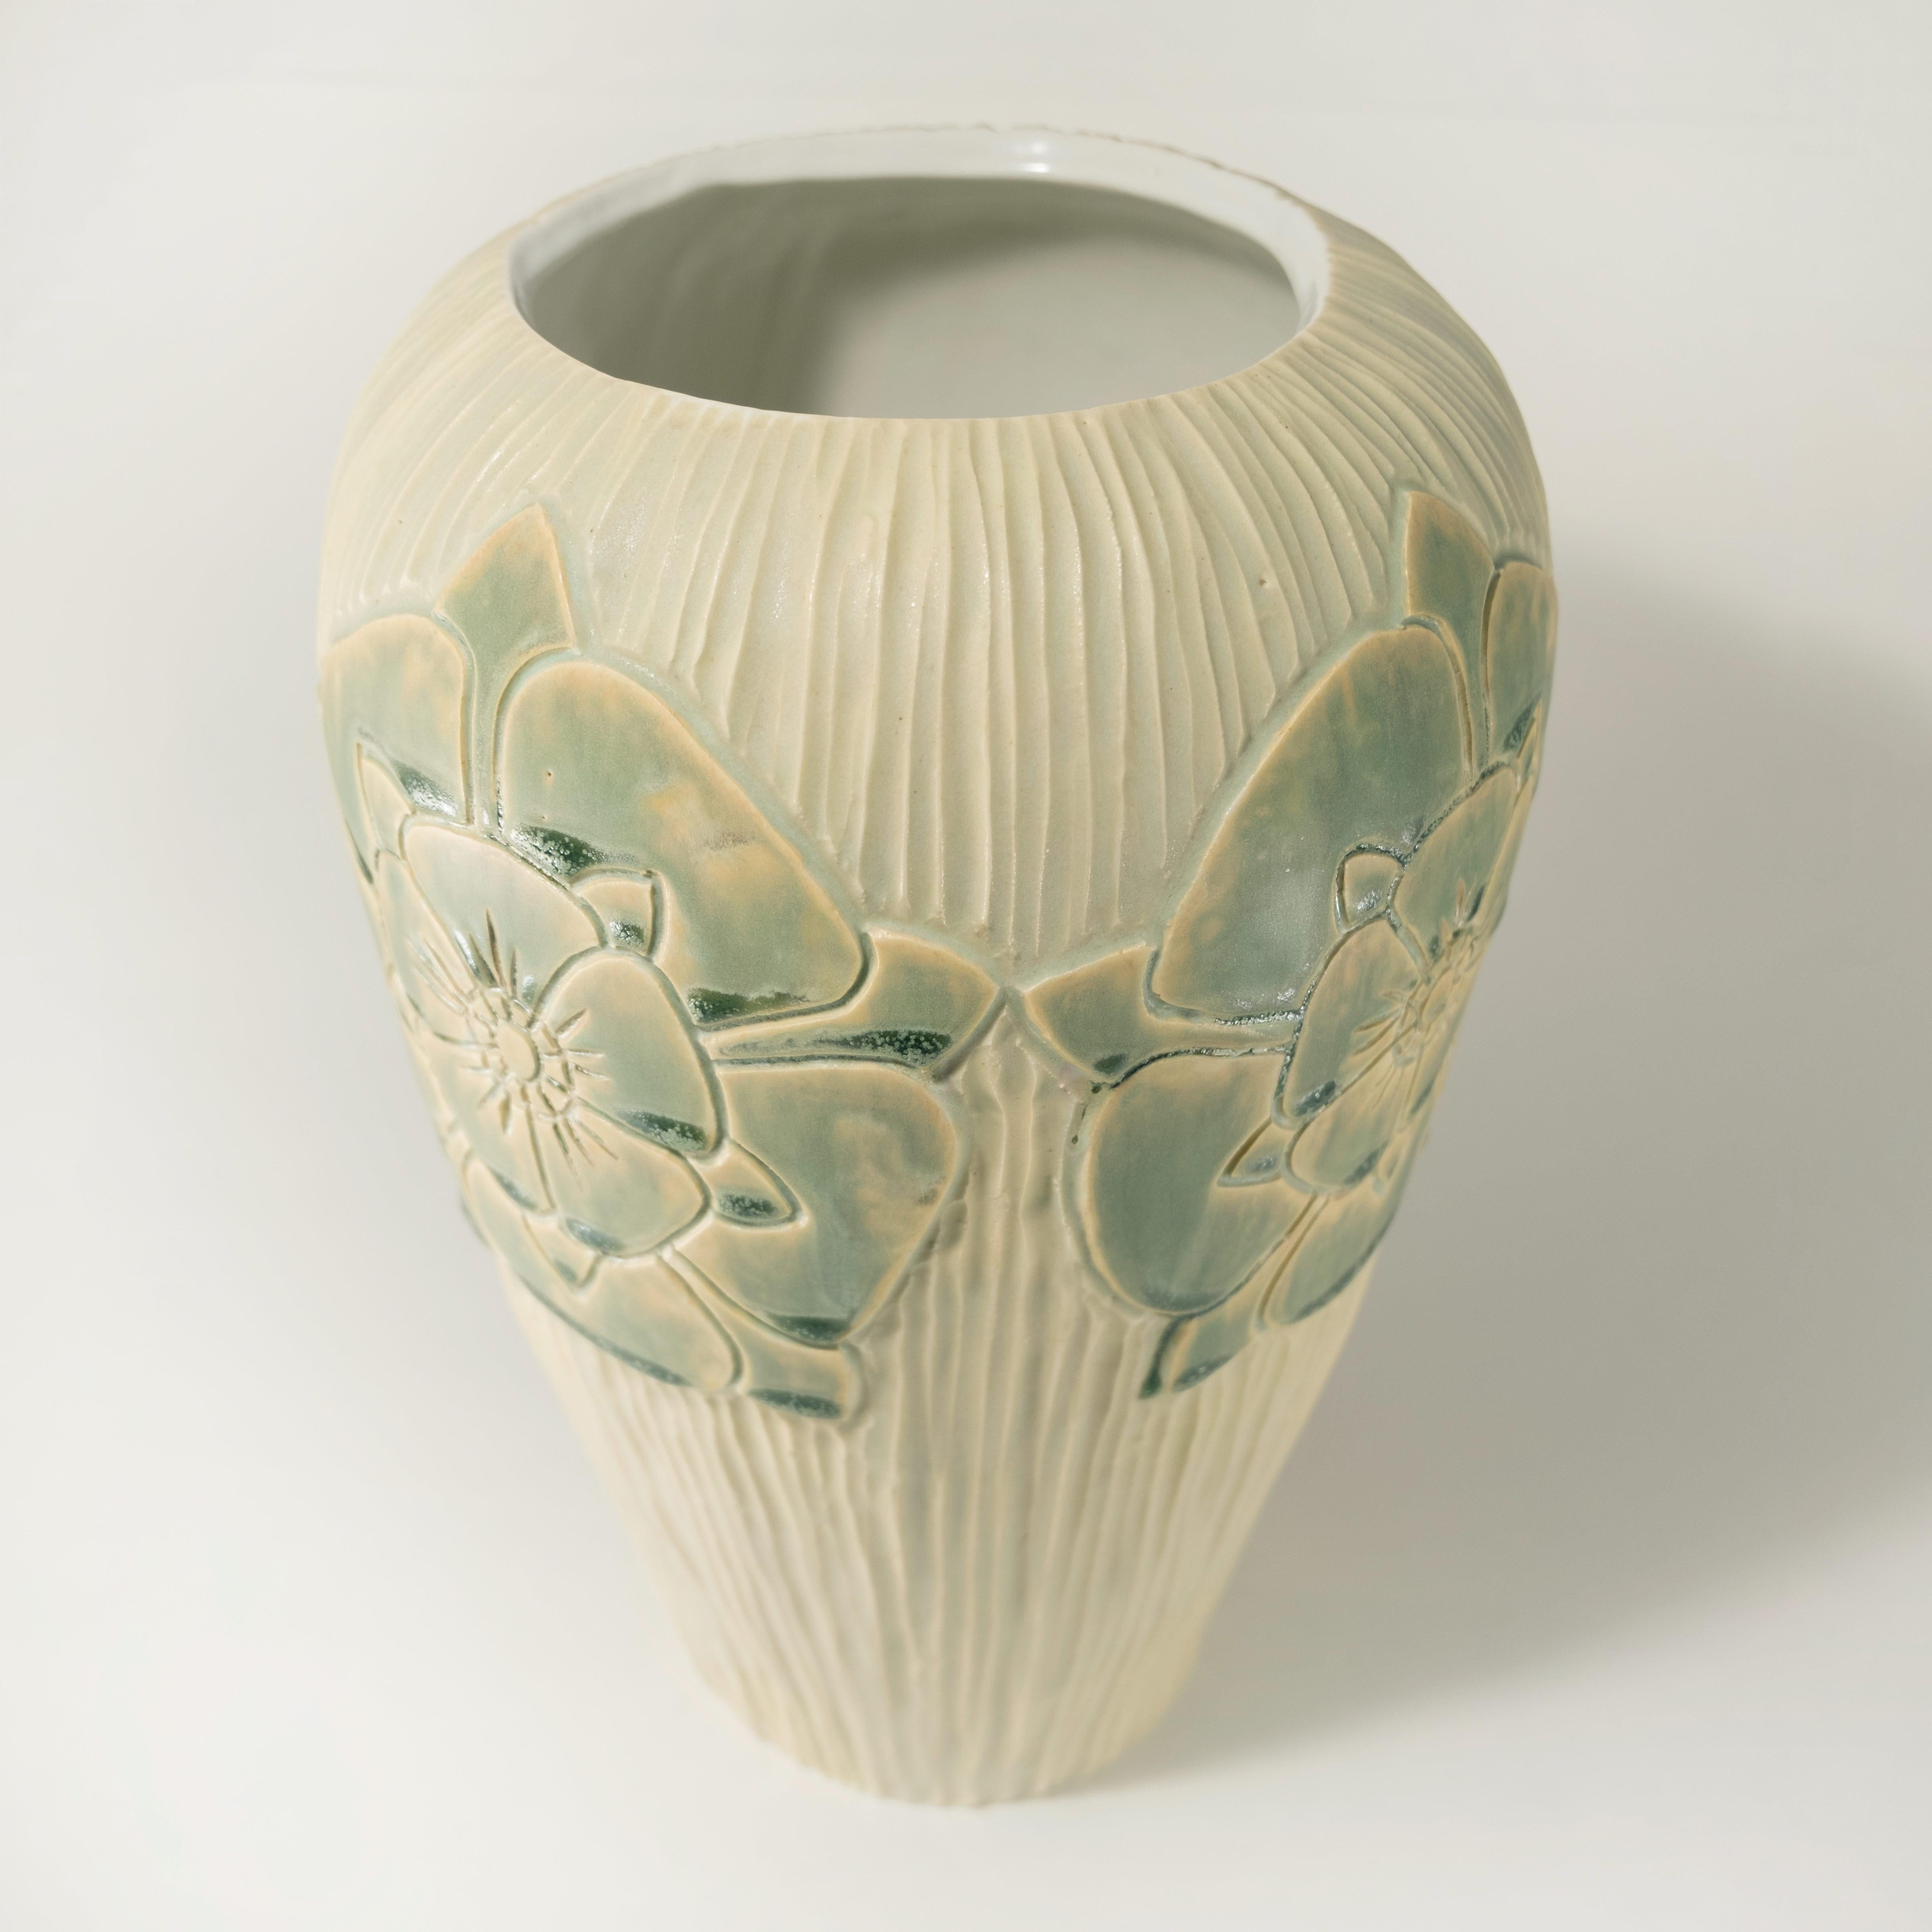 English rose Arts & Crafts design porcelain vase, hand carved and crafted by Christopher Brody. 
Available in Multi-color $1050, (as pictured in Main Image)
Dual Seafoam Green, $900 list, and solid Midnight Blue, $725.
Custom order, 5-6 weeks lead